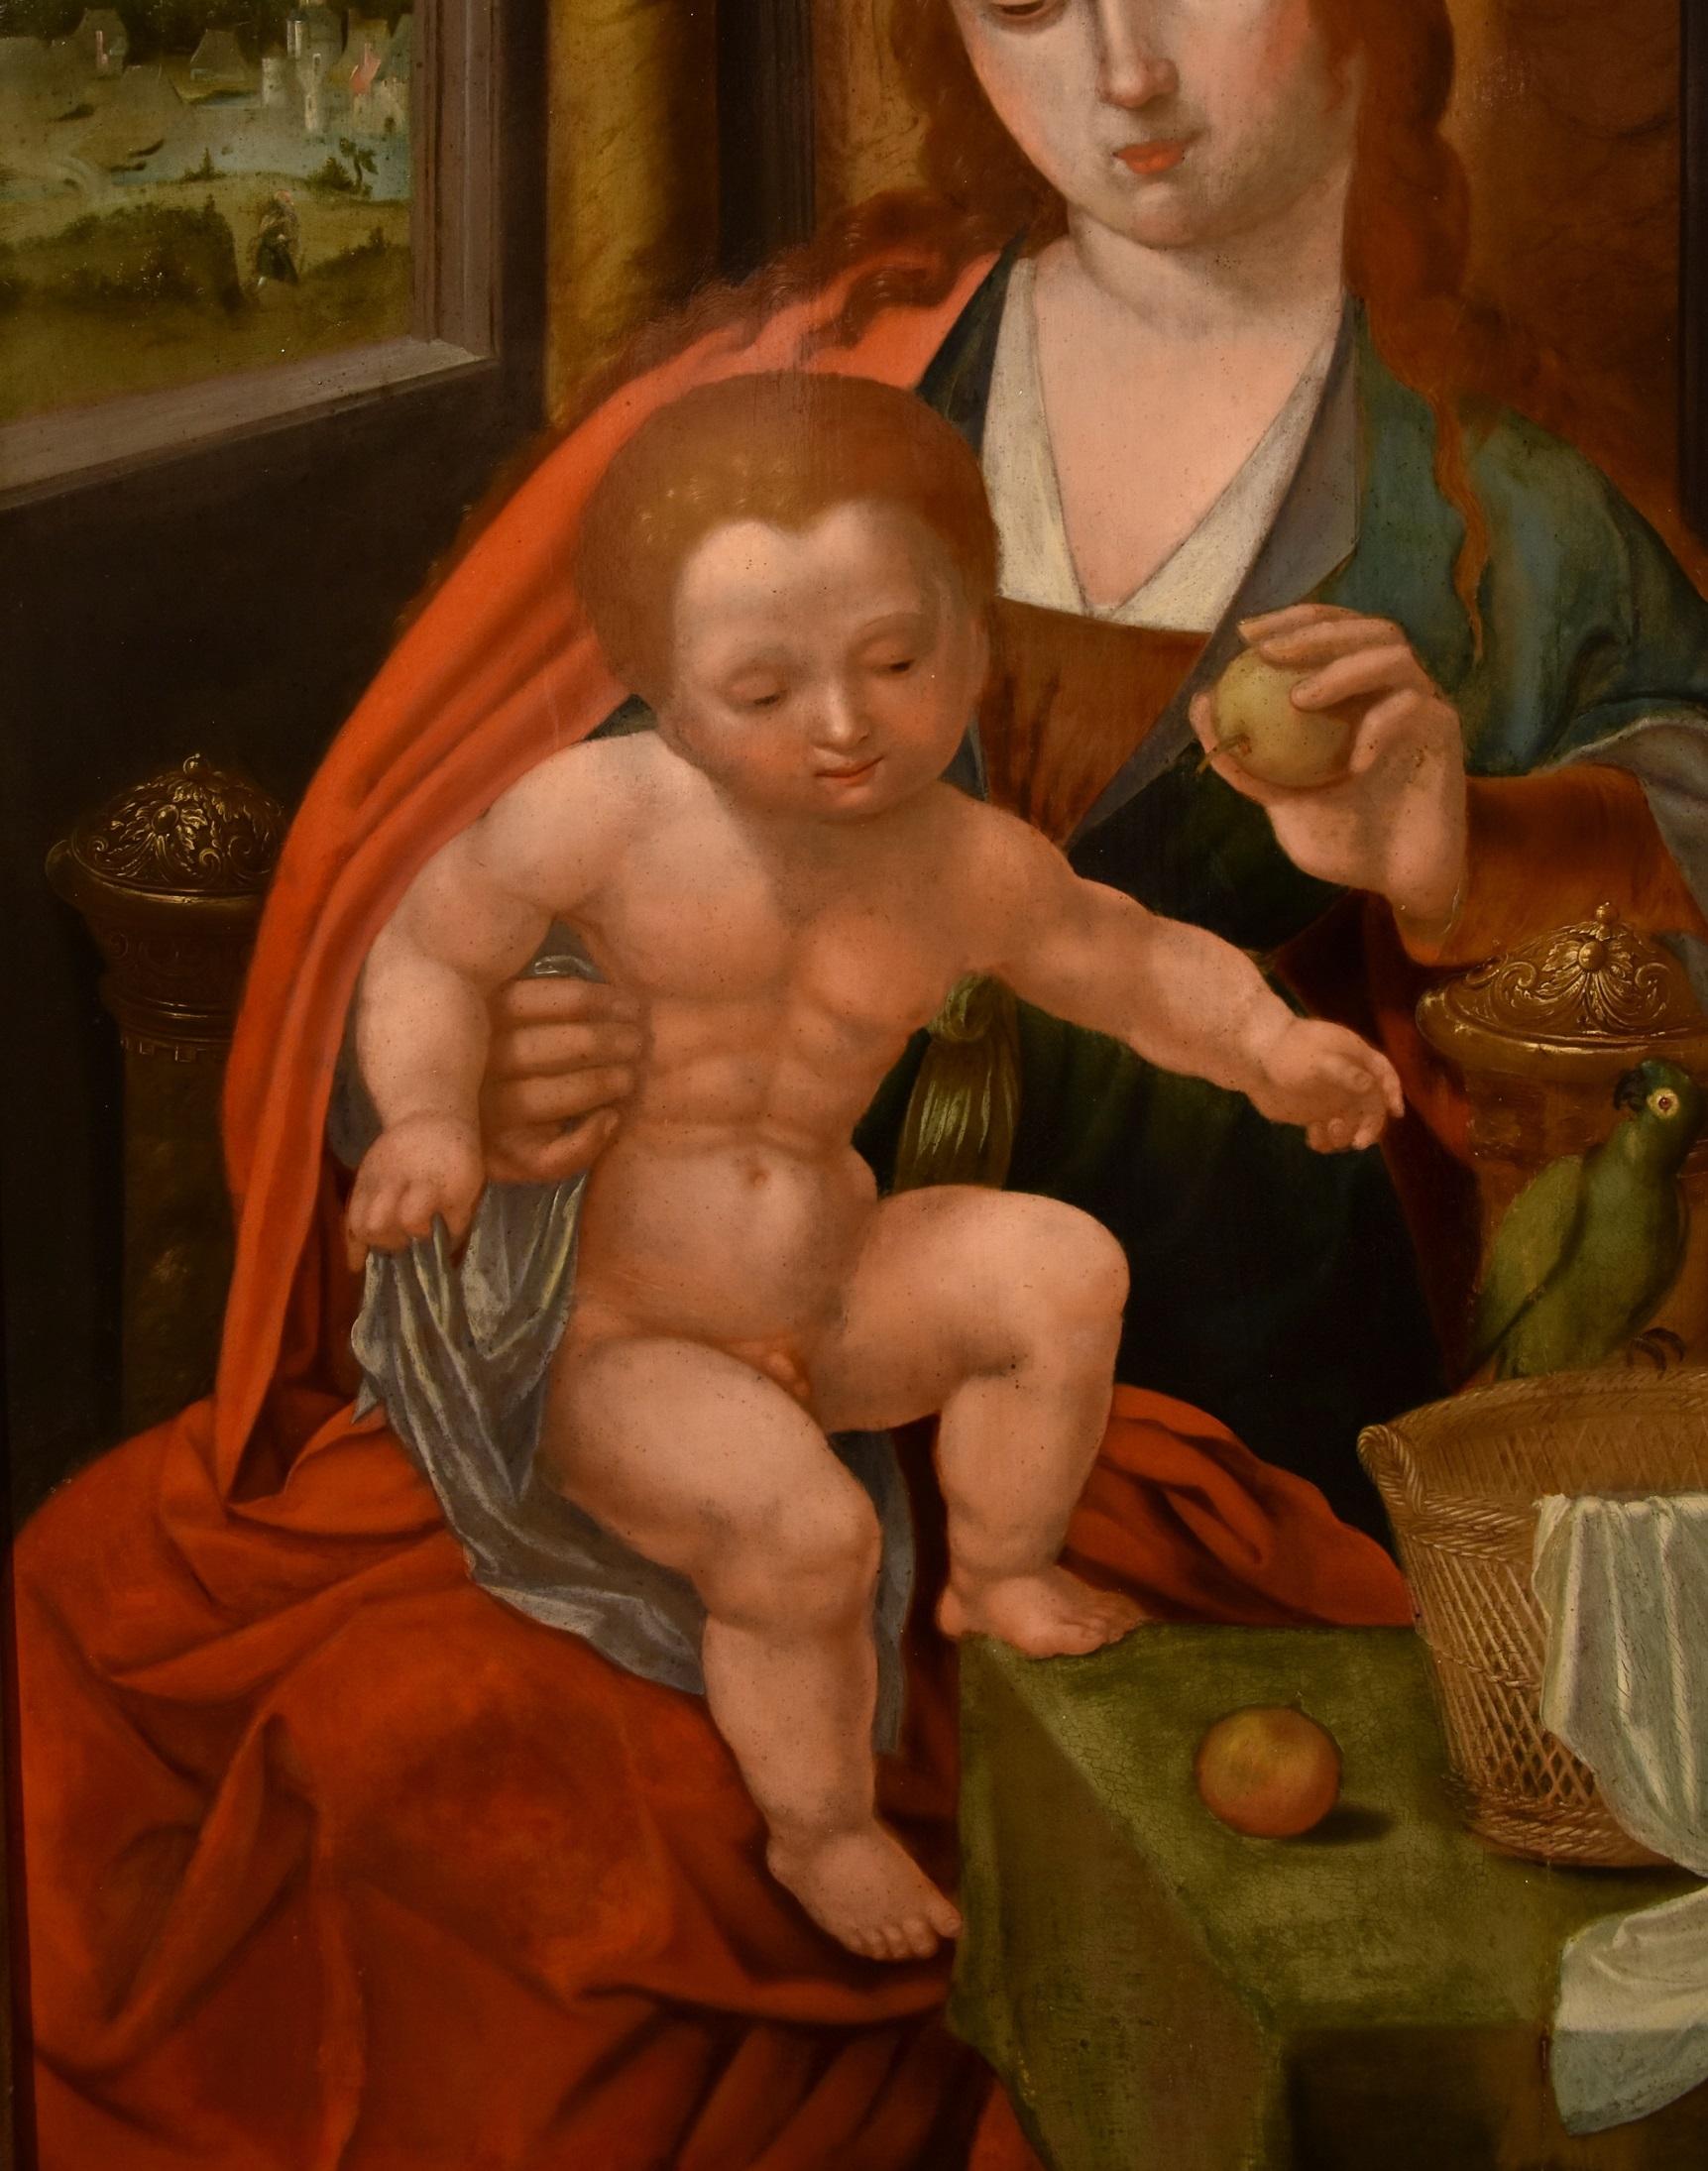 'Master of the parrot' (a painter active in Antwerp in the early 16th century, whose name refers to the parrot who always occurs in his paintings) - follower of

Madonna on the throne with child
(With the coat of arms of the client family in the